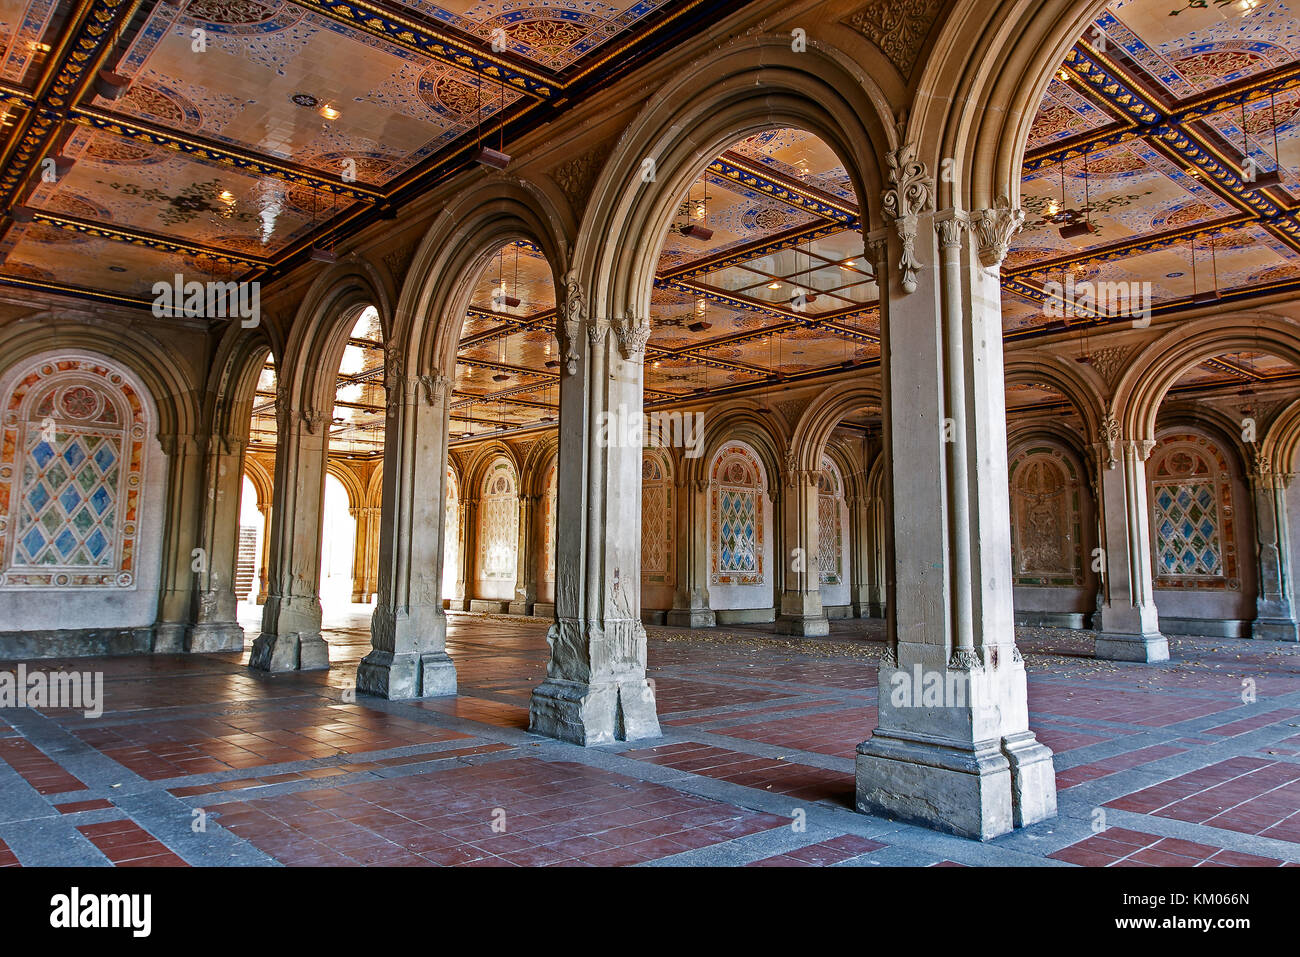 Under Central Park's Bethesda Terrace - Made and Curated